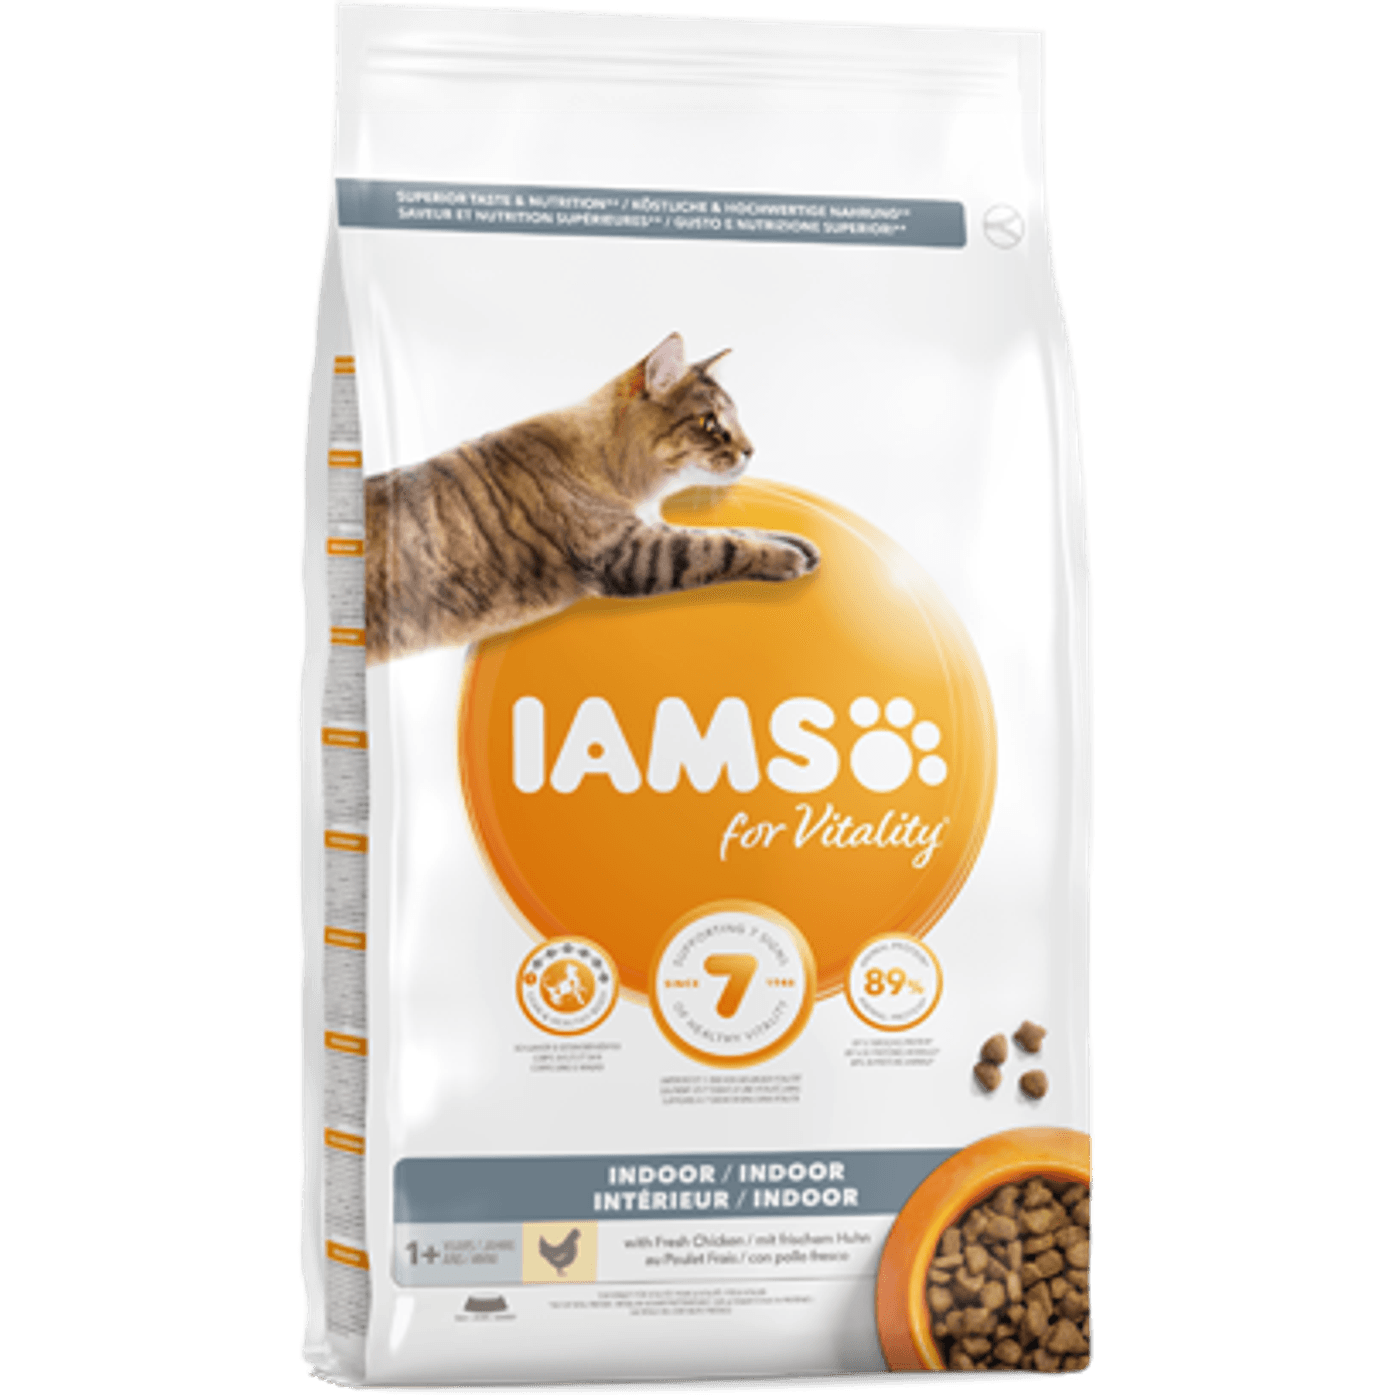 Iams-for-Vitality-Indoor-Cat-Food-with-Fresh-Chicken